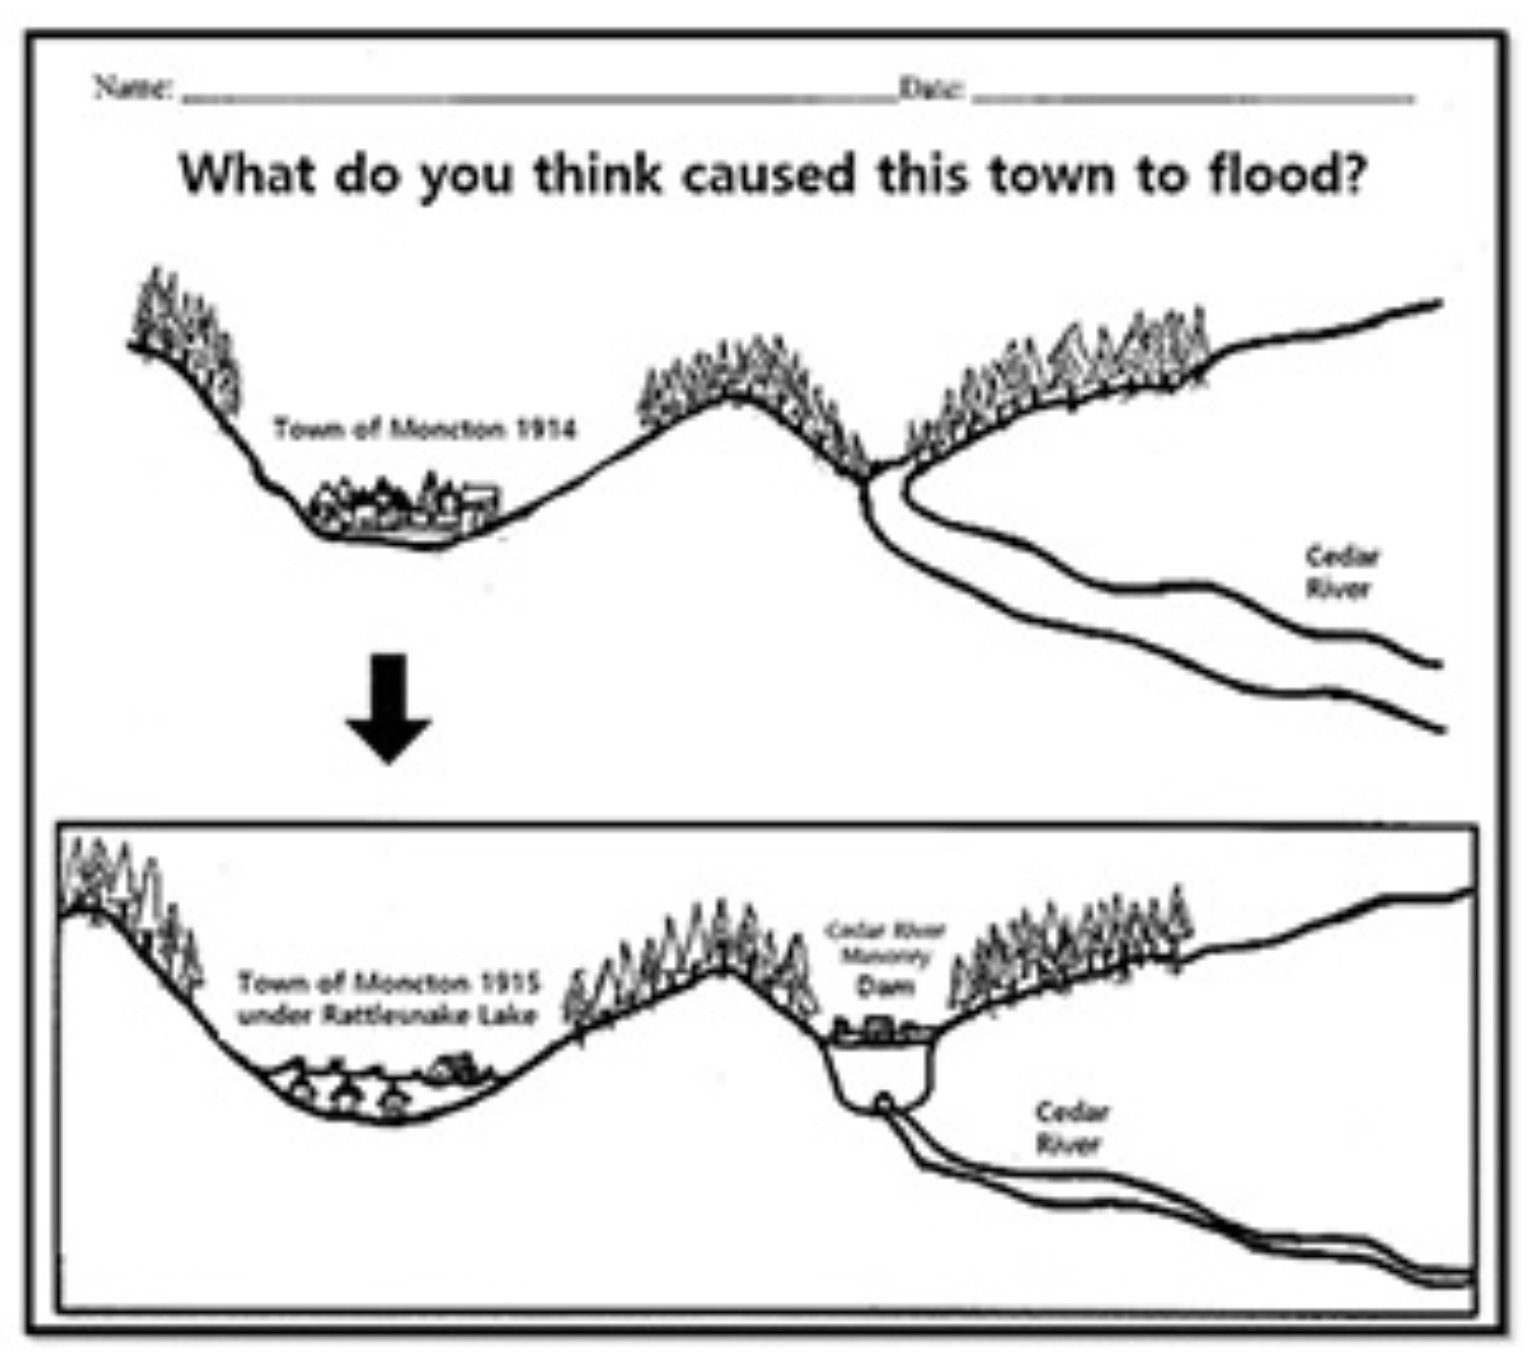 A page for students to draw what they think caused the town to flood with two panels. The top panel is of the town of Moncton before the flood in 1914, the lower panel is of the town after the flood in 1915.